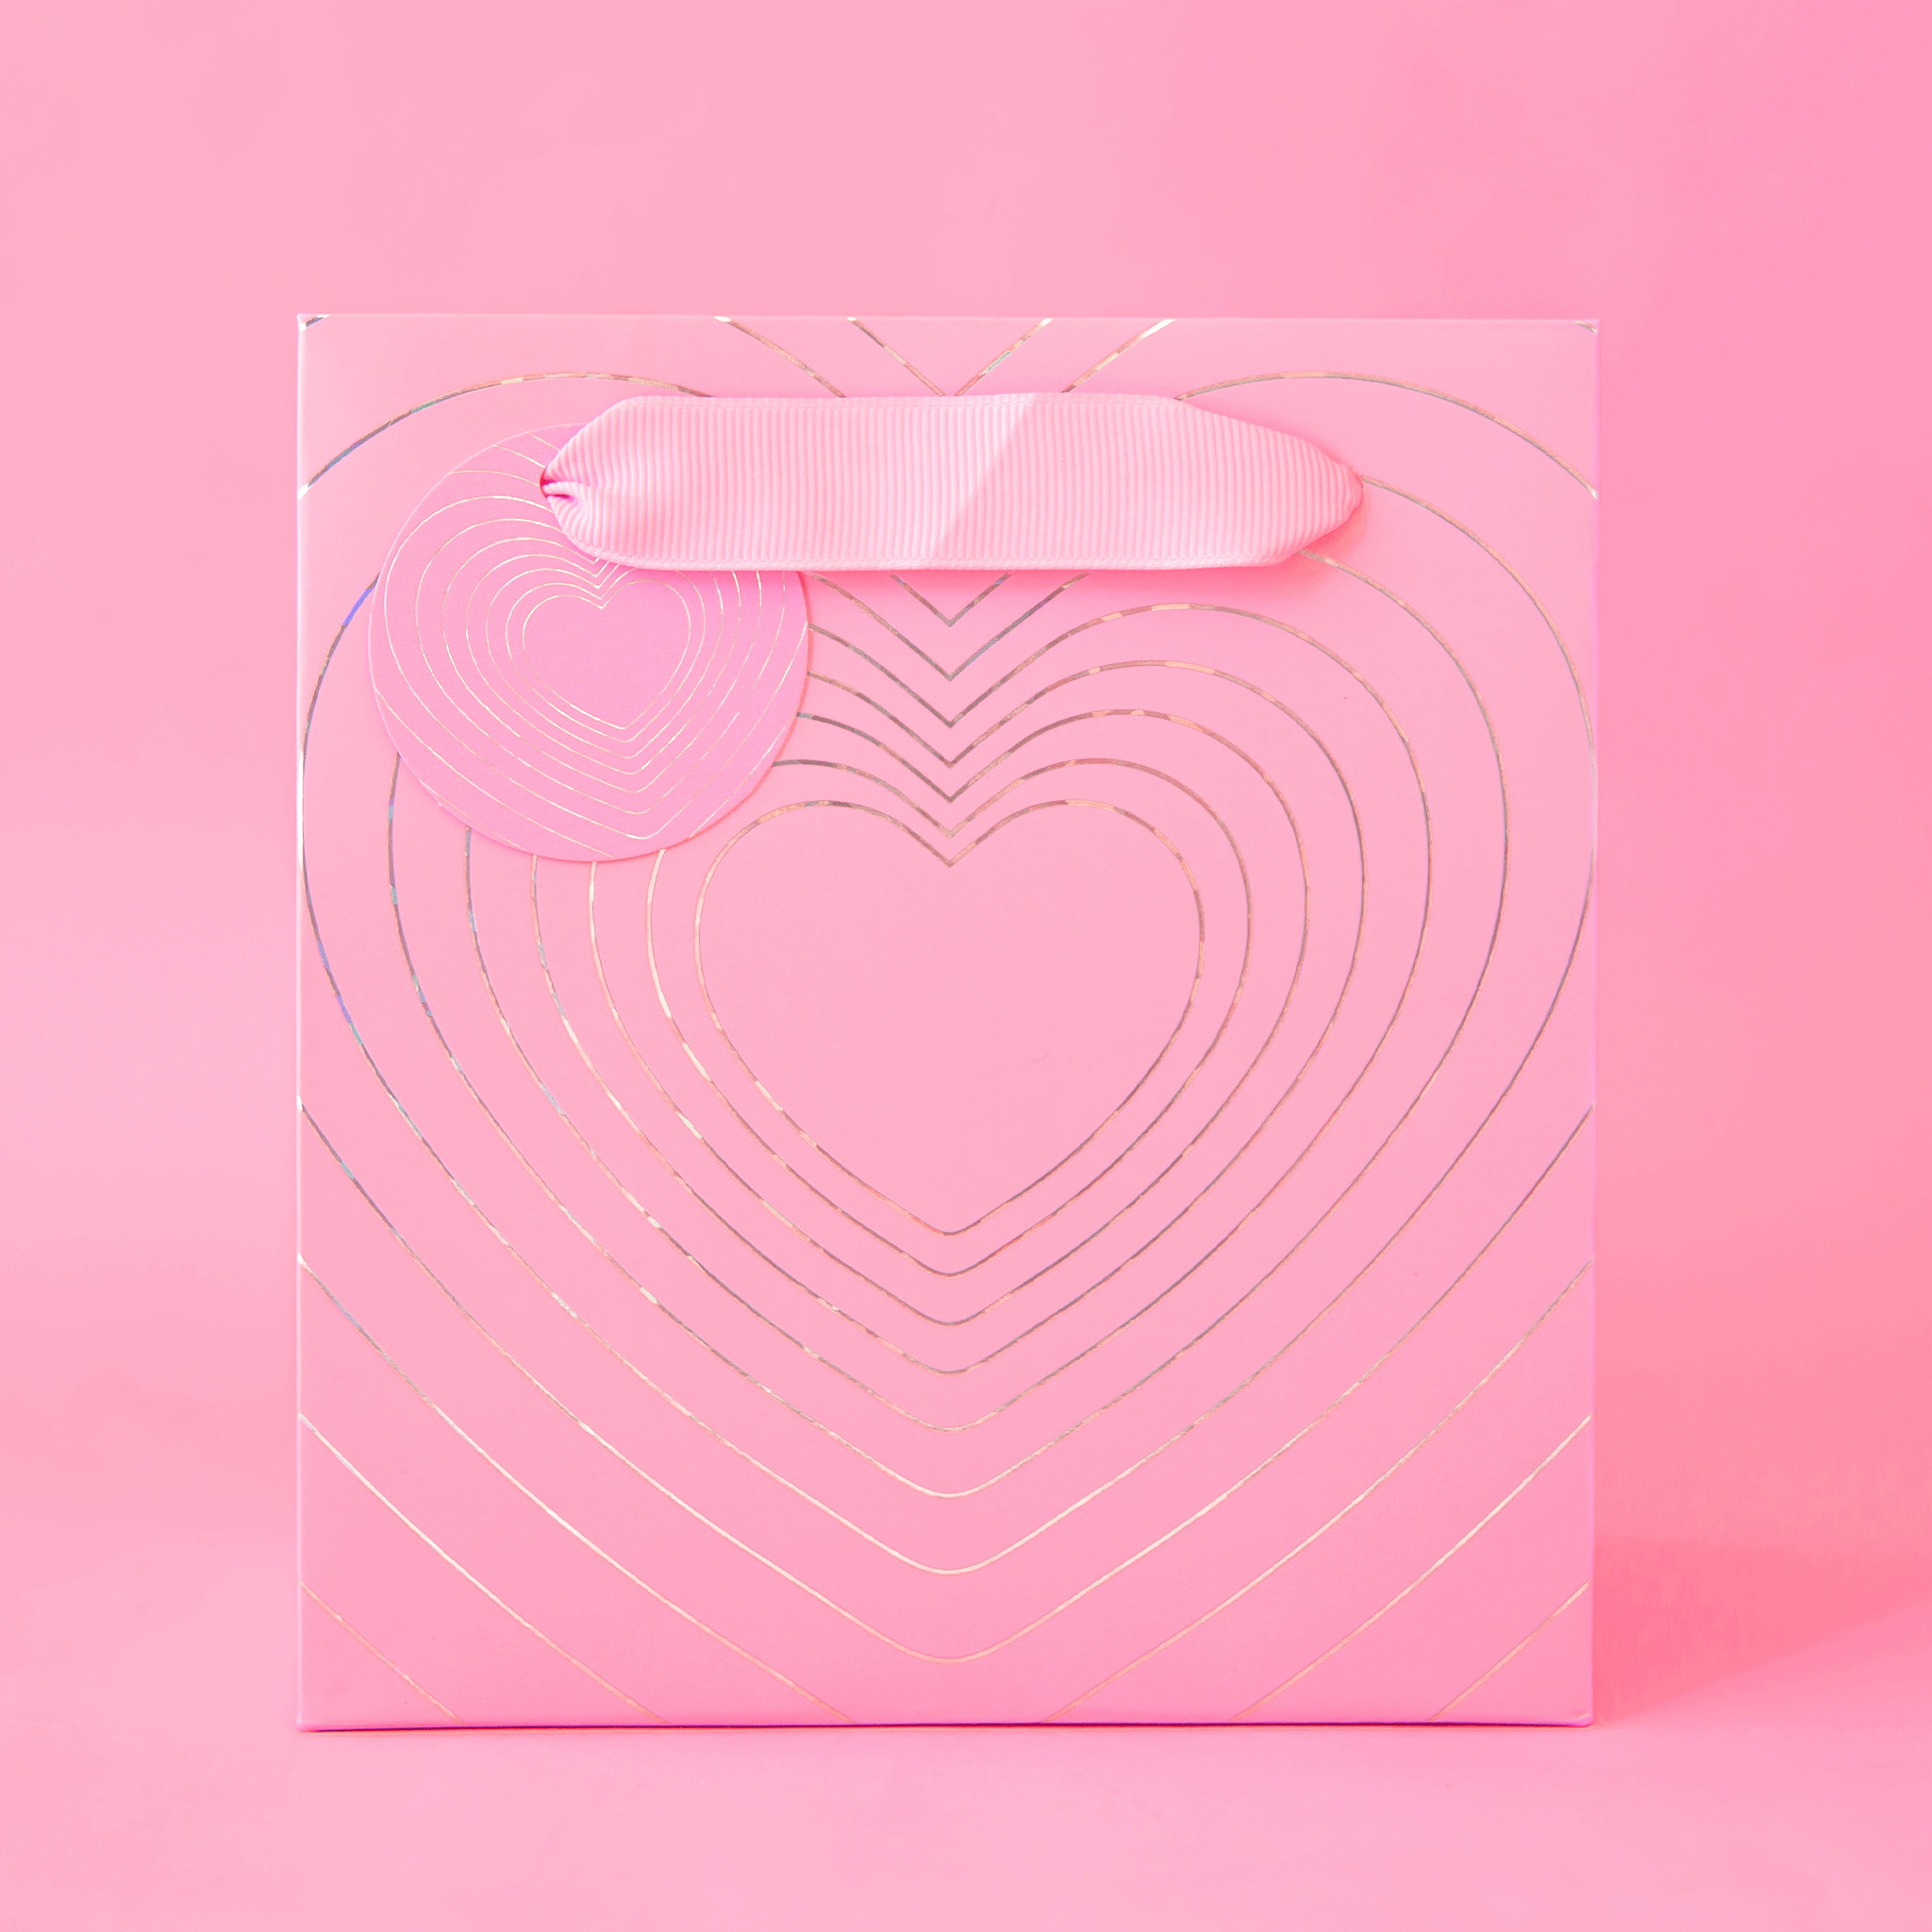 On a light purple background is a purple gift bag with a silver radiating heart design and ribbon handles.